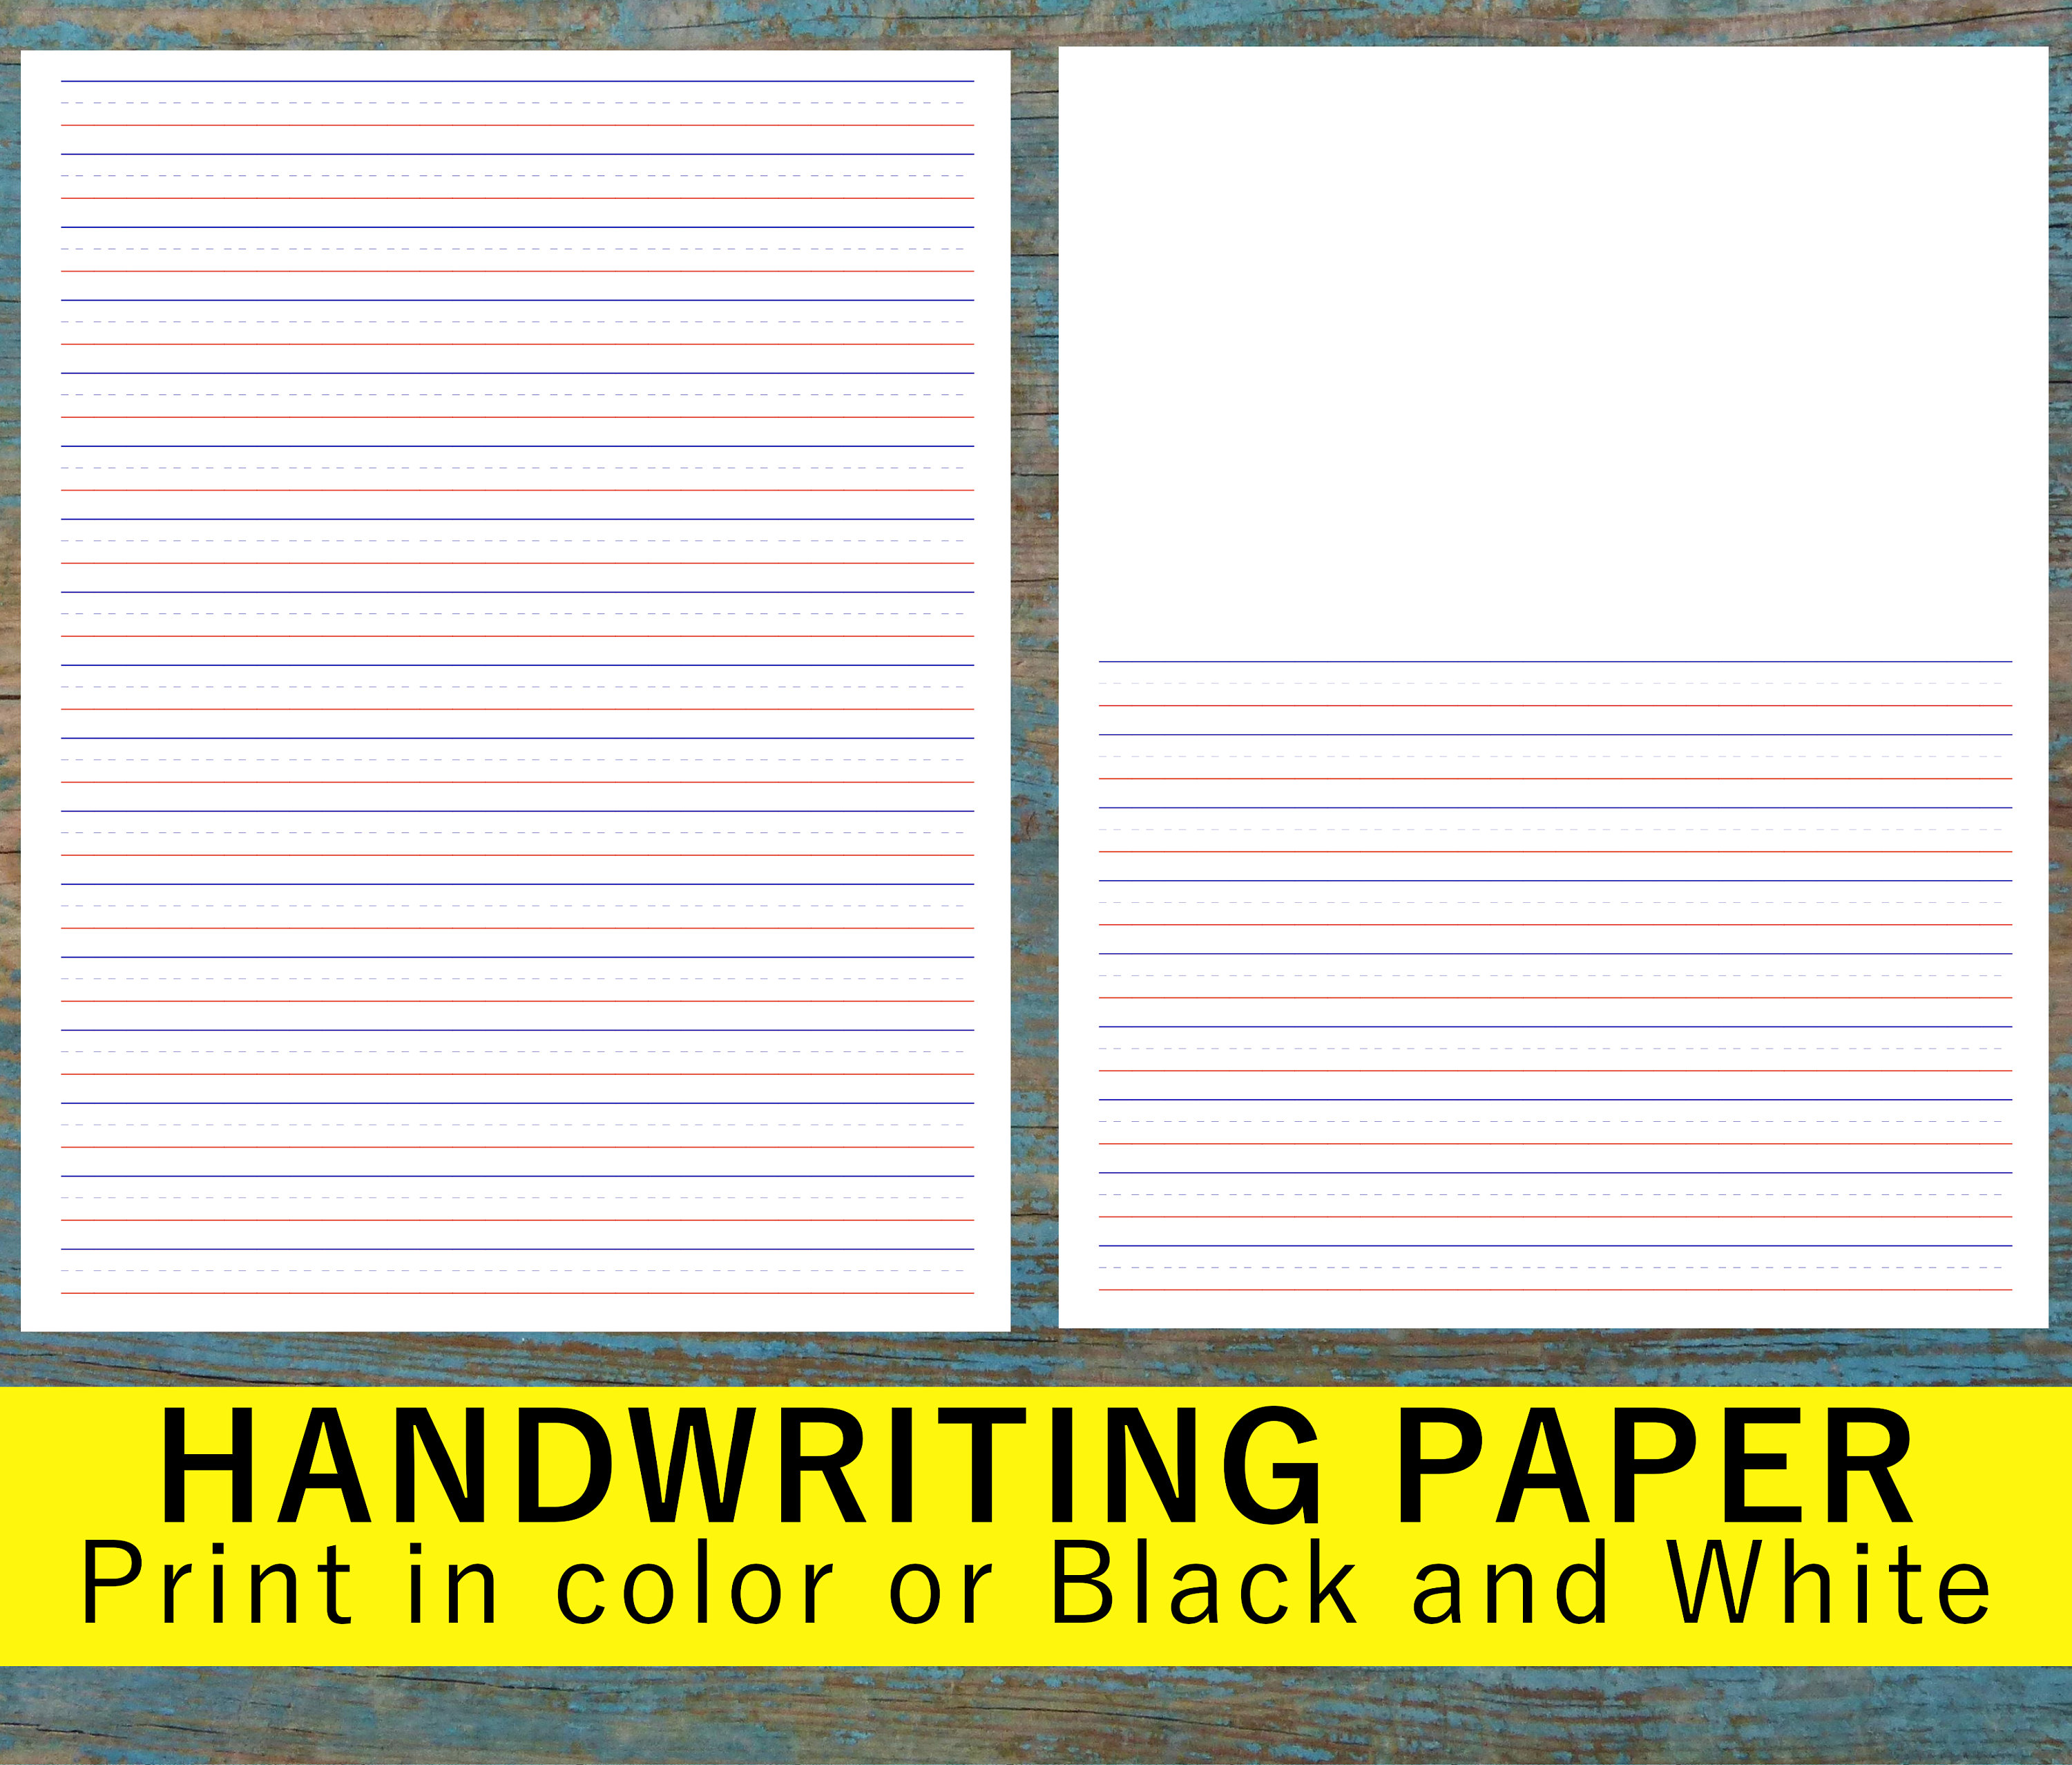 Handwriting Paper Printable Story Writing Paper Printable Elementary Home  Schoolong Printable Lined Paper Paper With Space to Draw 